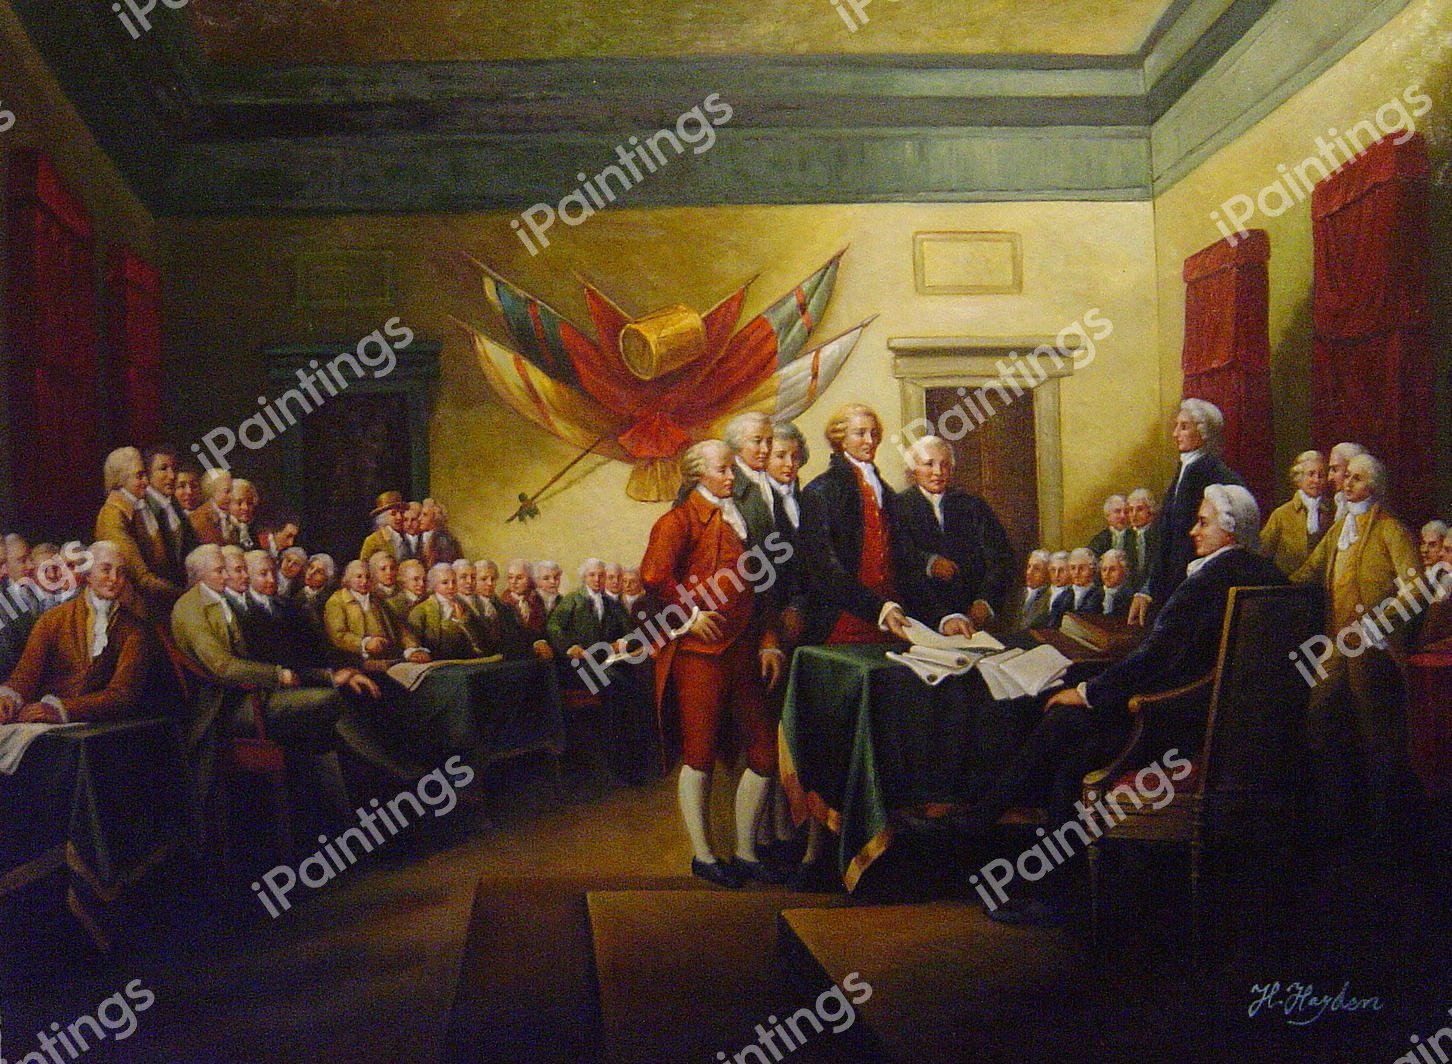 Eliteart-The Declaration of Independence by John Trumbull Oil Painting Reproduction Giclee Wall Art Canvas Prints-Framed Size:26x 36 